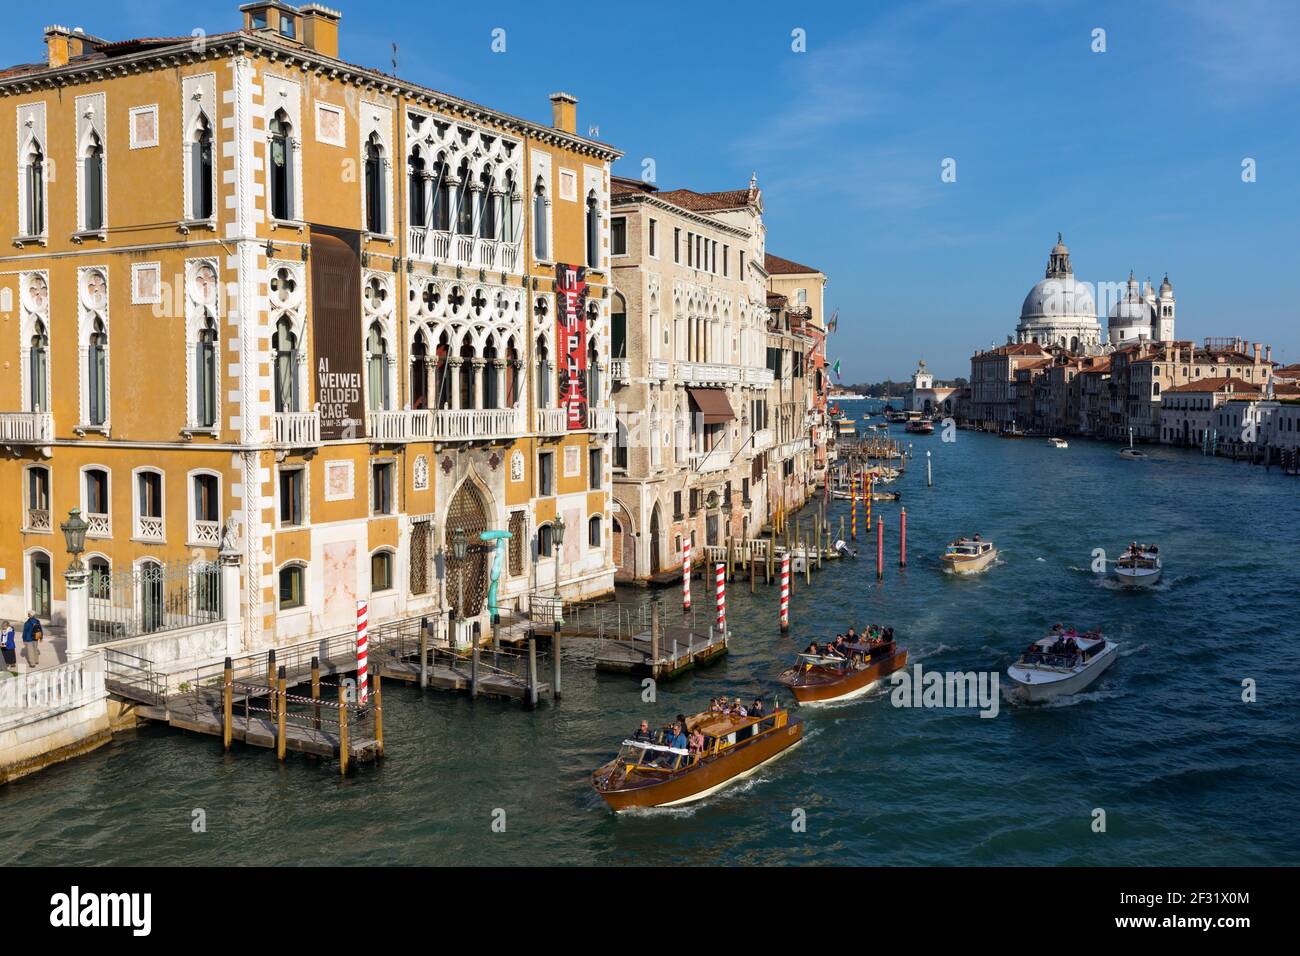 The Grand Canal in Venice Stock Photo